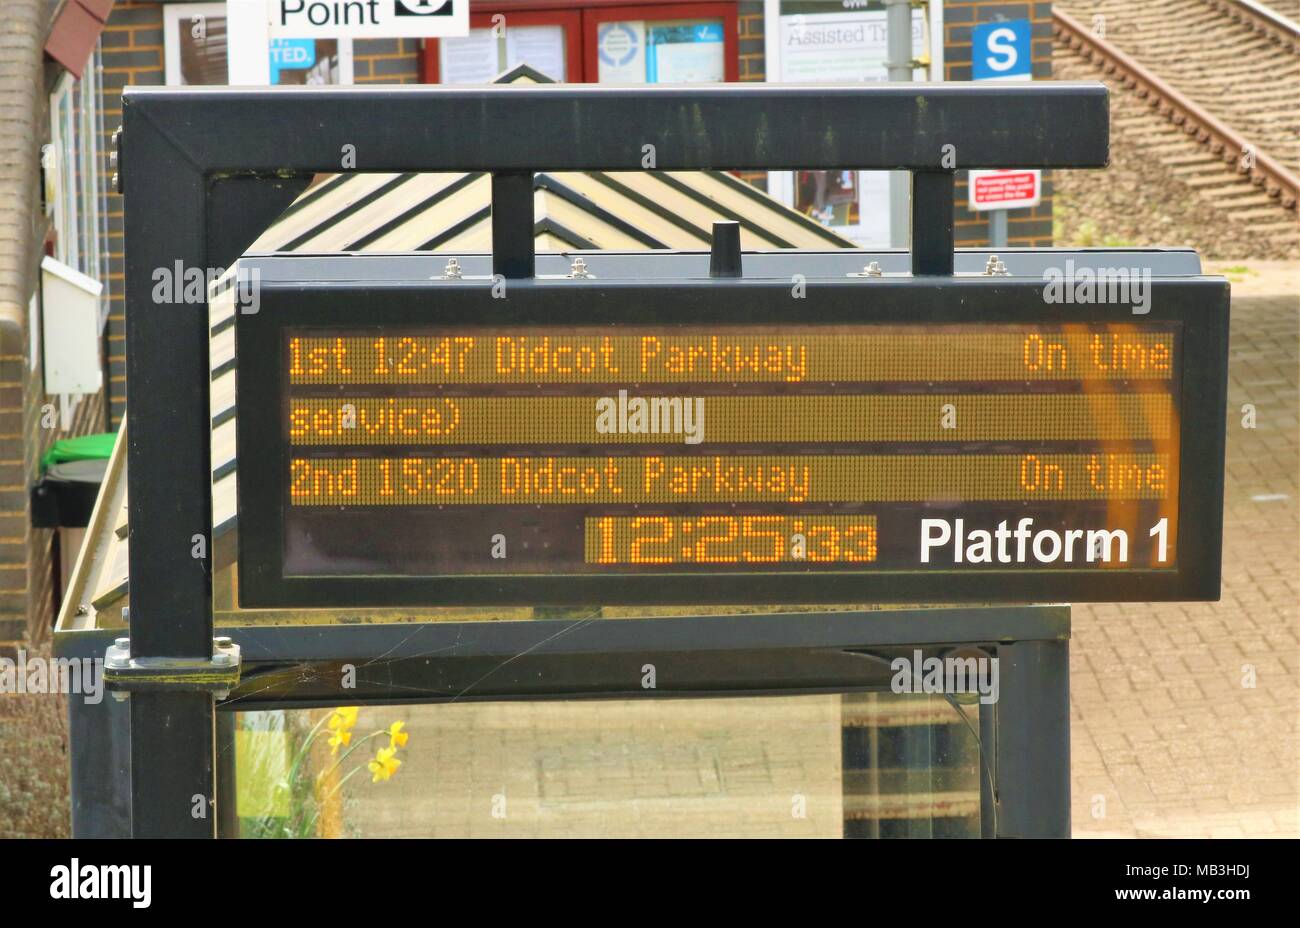 Electronic information board on platform 1 at Heyford Railway Station, Oxfordshire, UK displaying Didcot Parkway on time at 12.25 Stock Photo